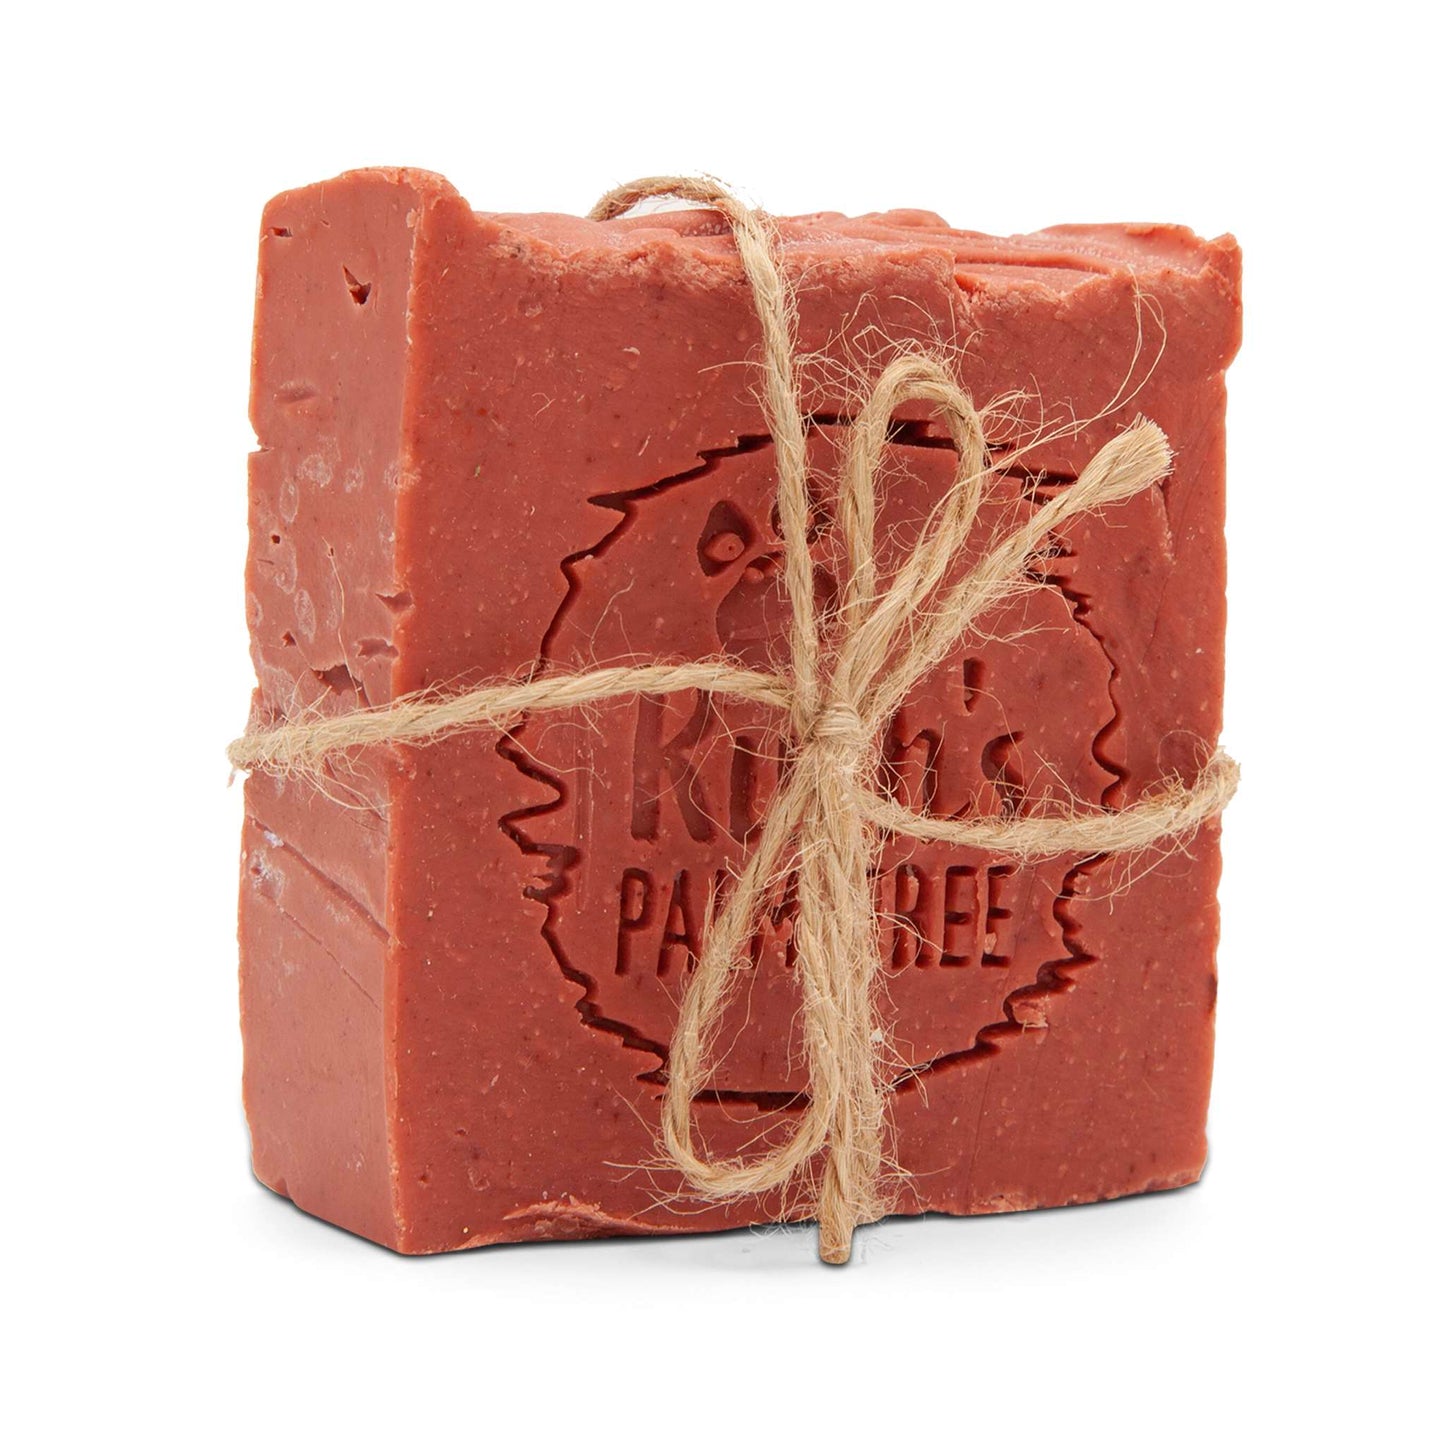 Ruth's Palm Free Soap Ruth's Palm Free Naked Soap - Comfort - Cinnamon, Ginger & Orange